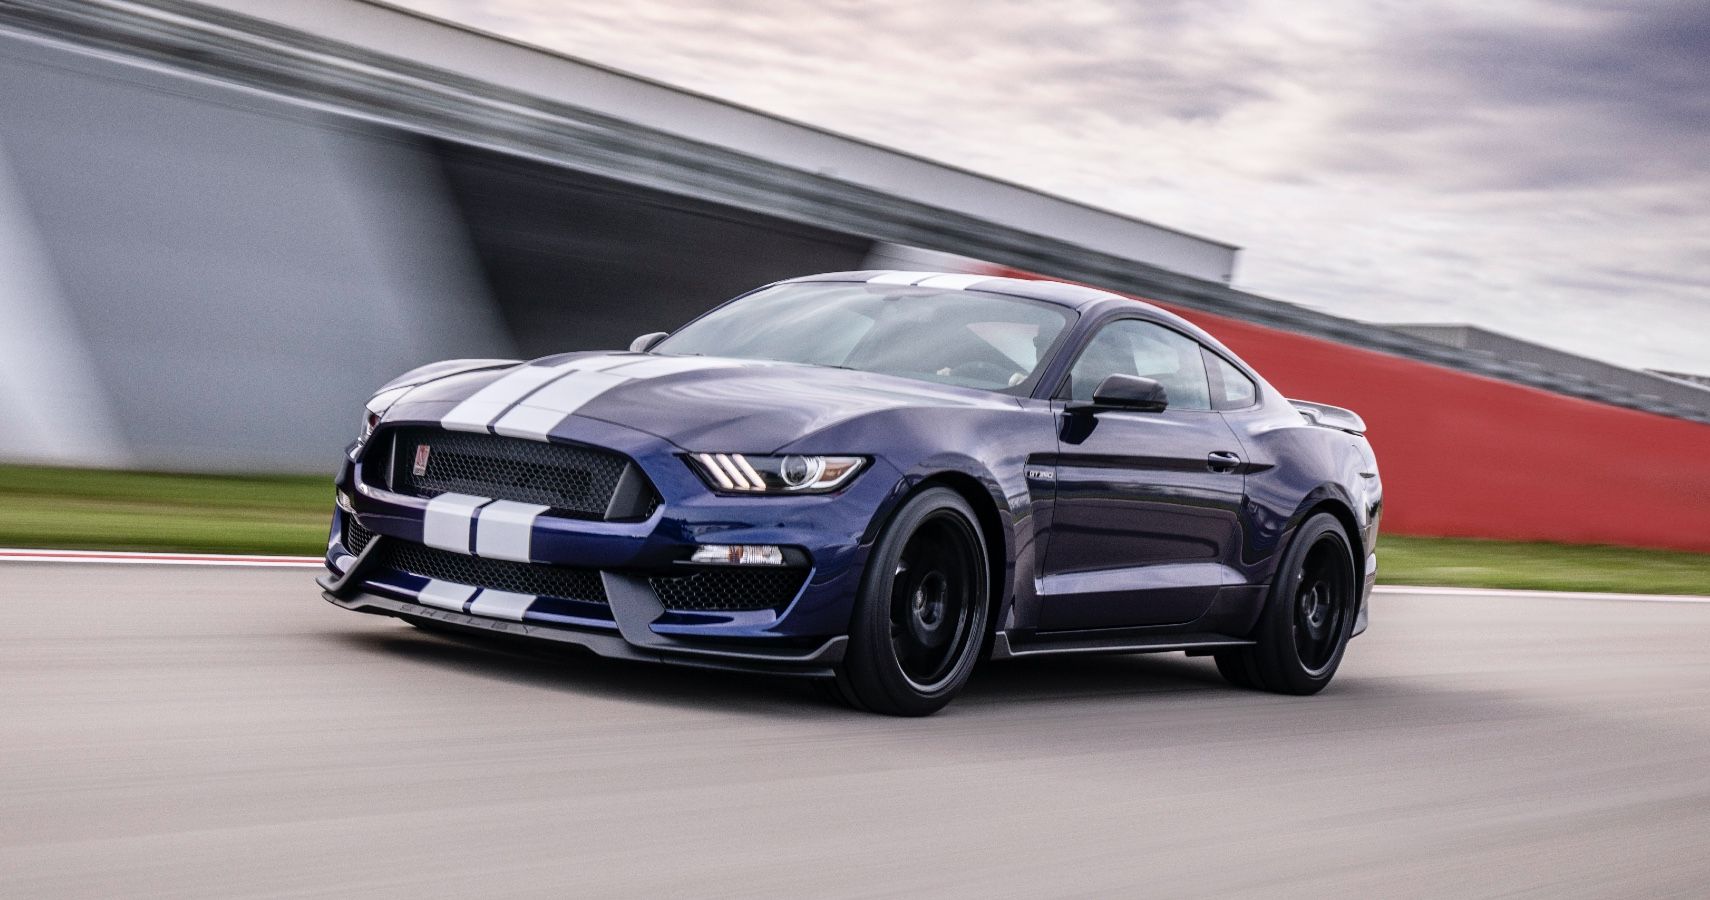 2019 Ford Mustang Shelby GT350 Blue on Track